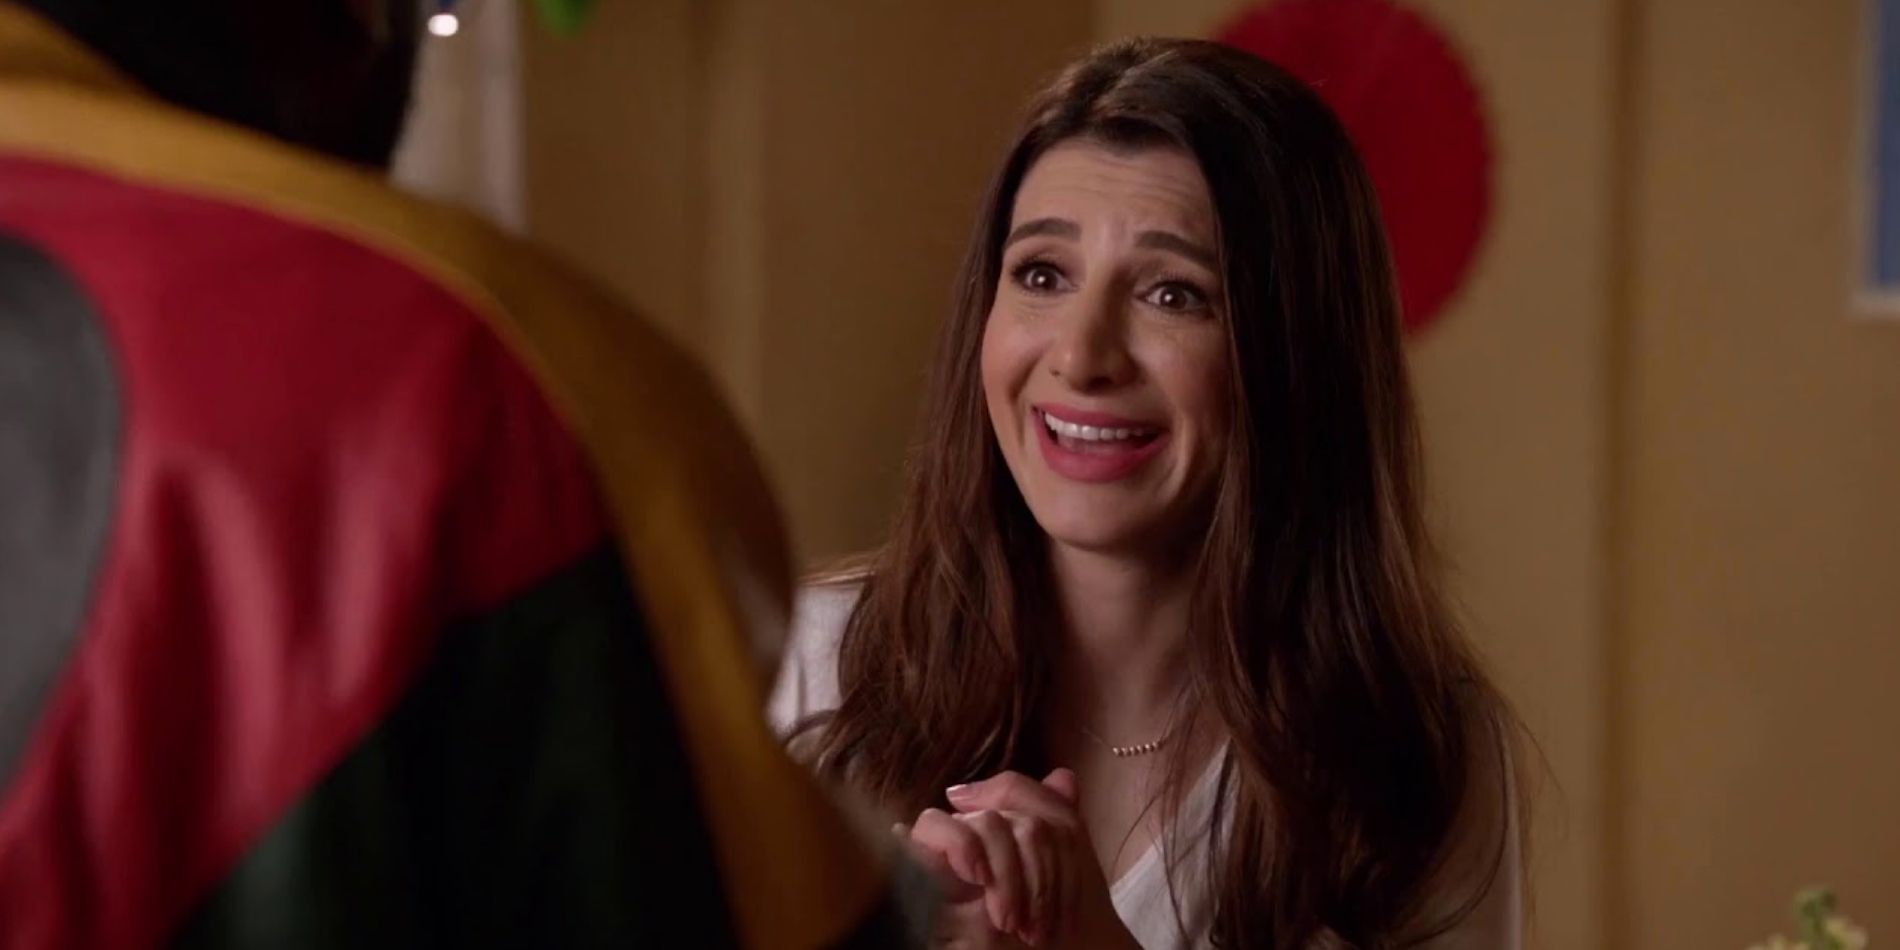 Aly smiling excitedly in New Girl